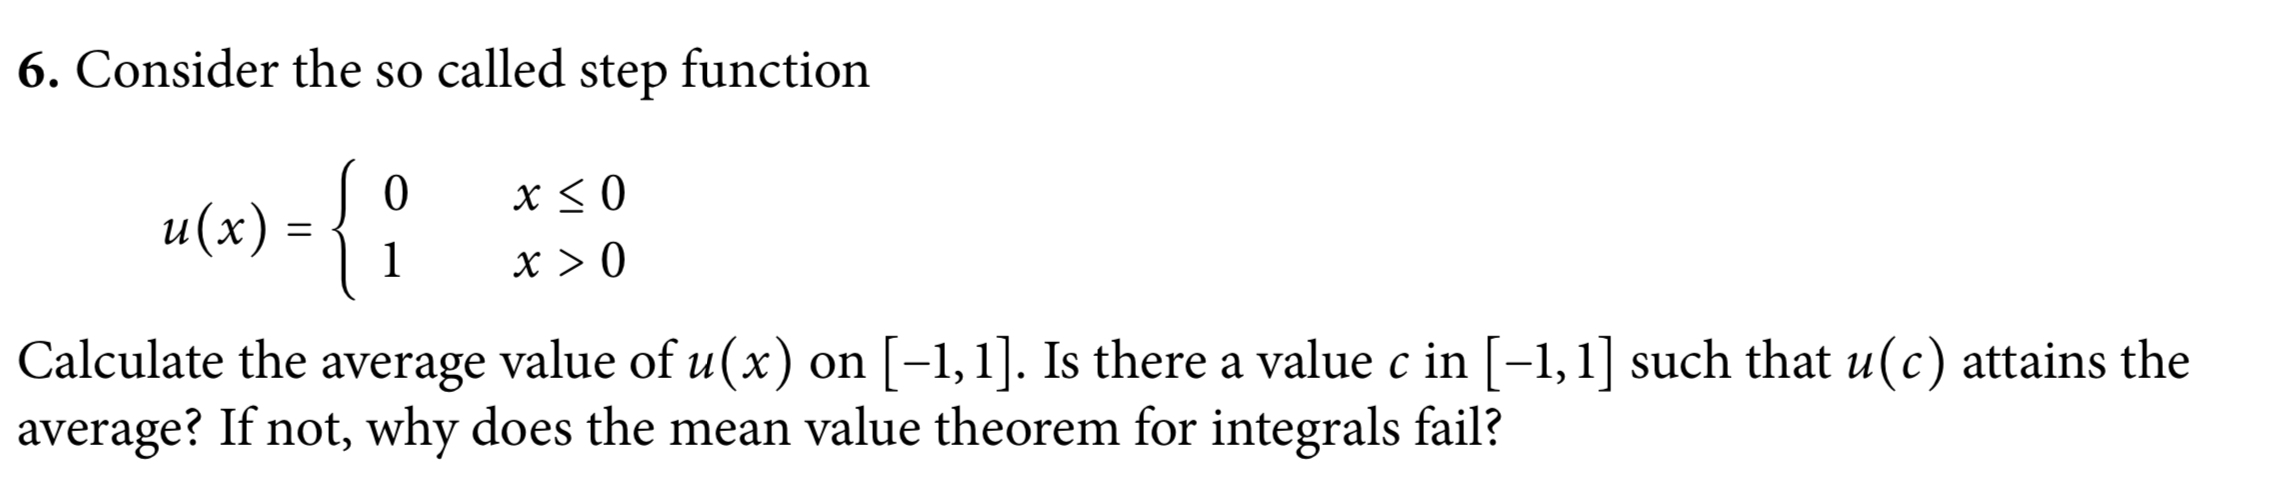 6. Consider the so called step function
х<0
u (х)
x > 0
Calculate the average value of u(x) on [-1,1]. Is there a value c in [-1,1] such that u(c) attains the
average? If not, why does the mean value theorem for integrals fail?
